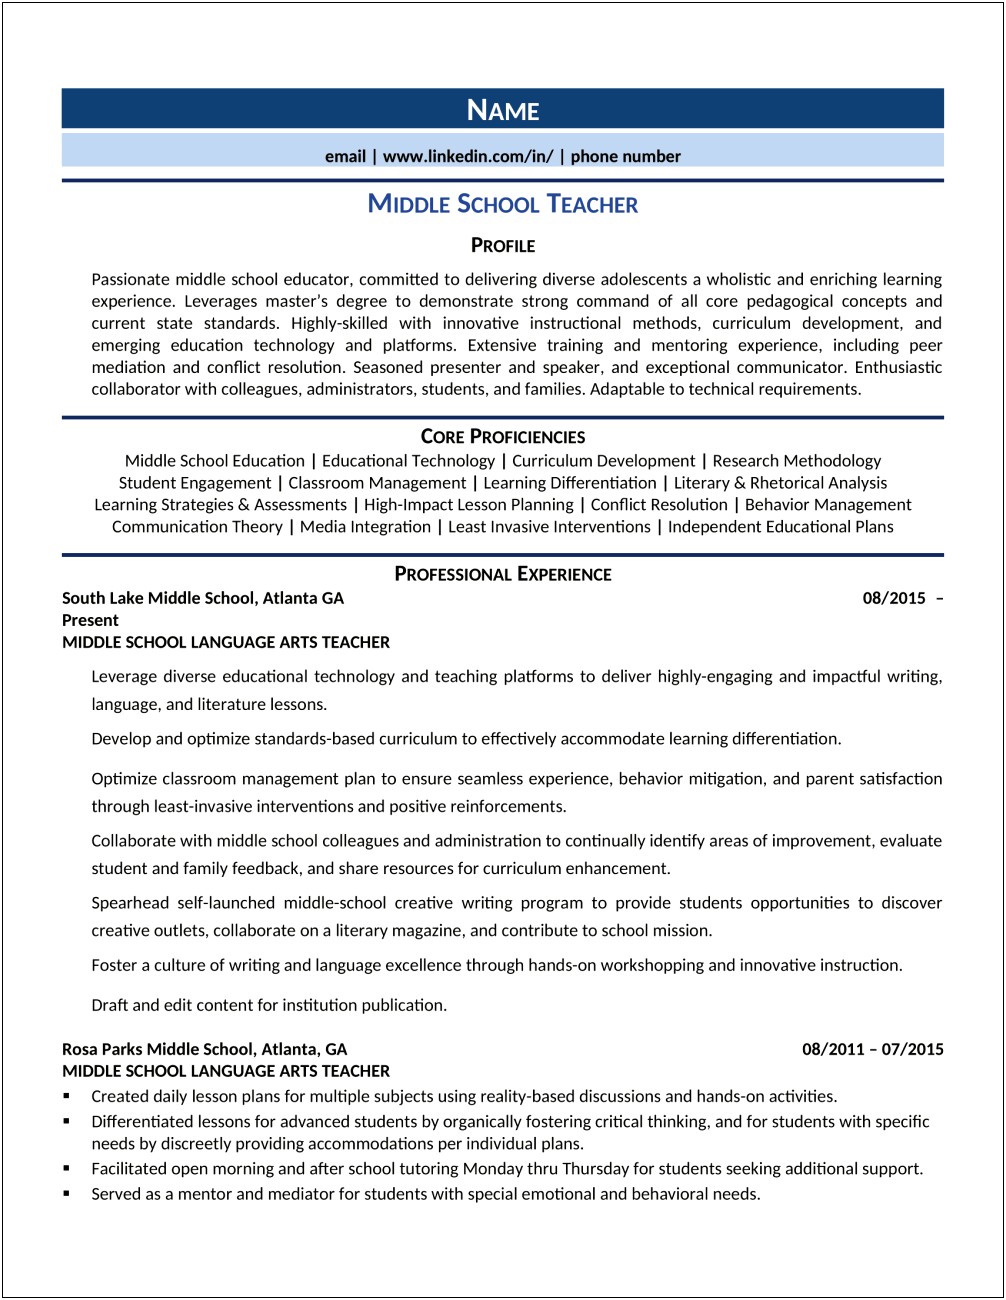 Resume Details To Include In High Schoole Education